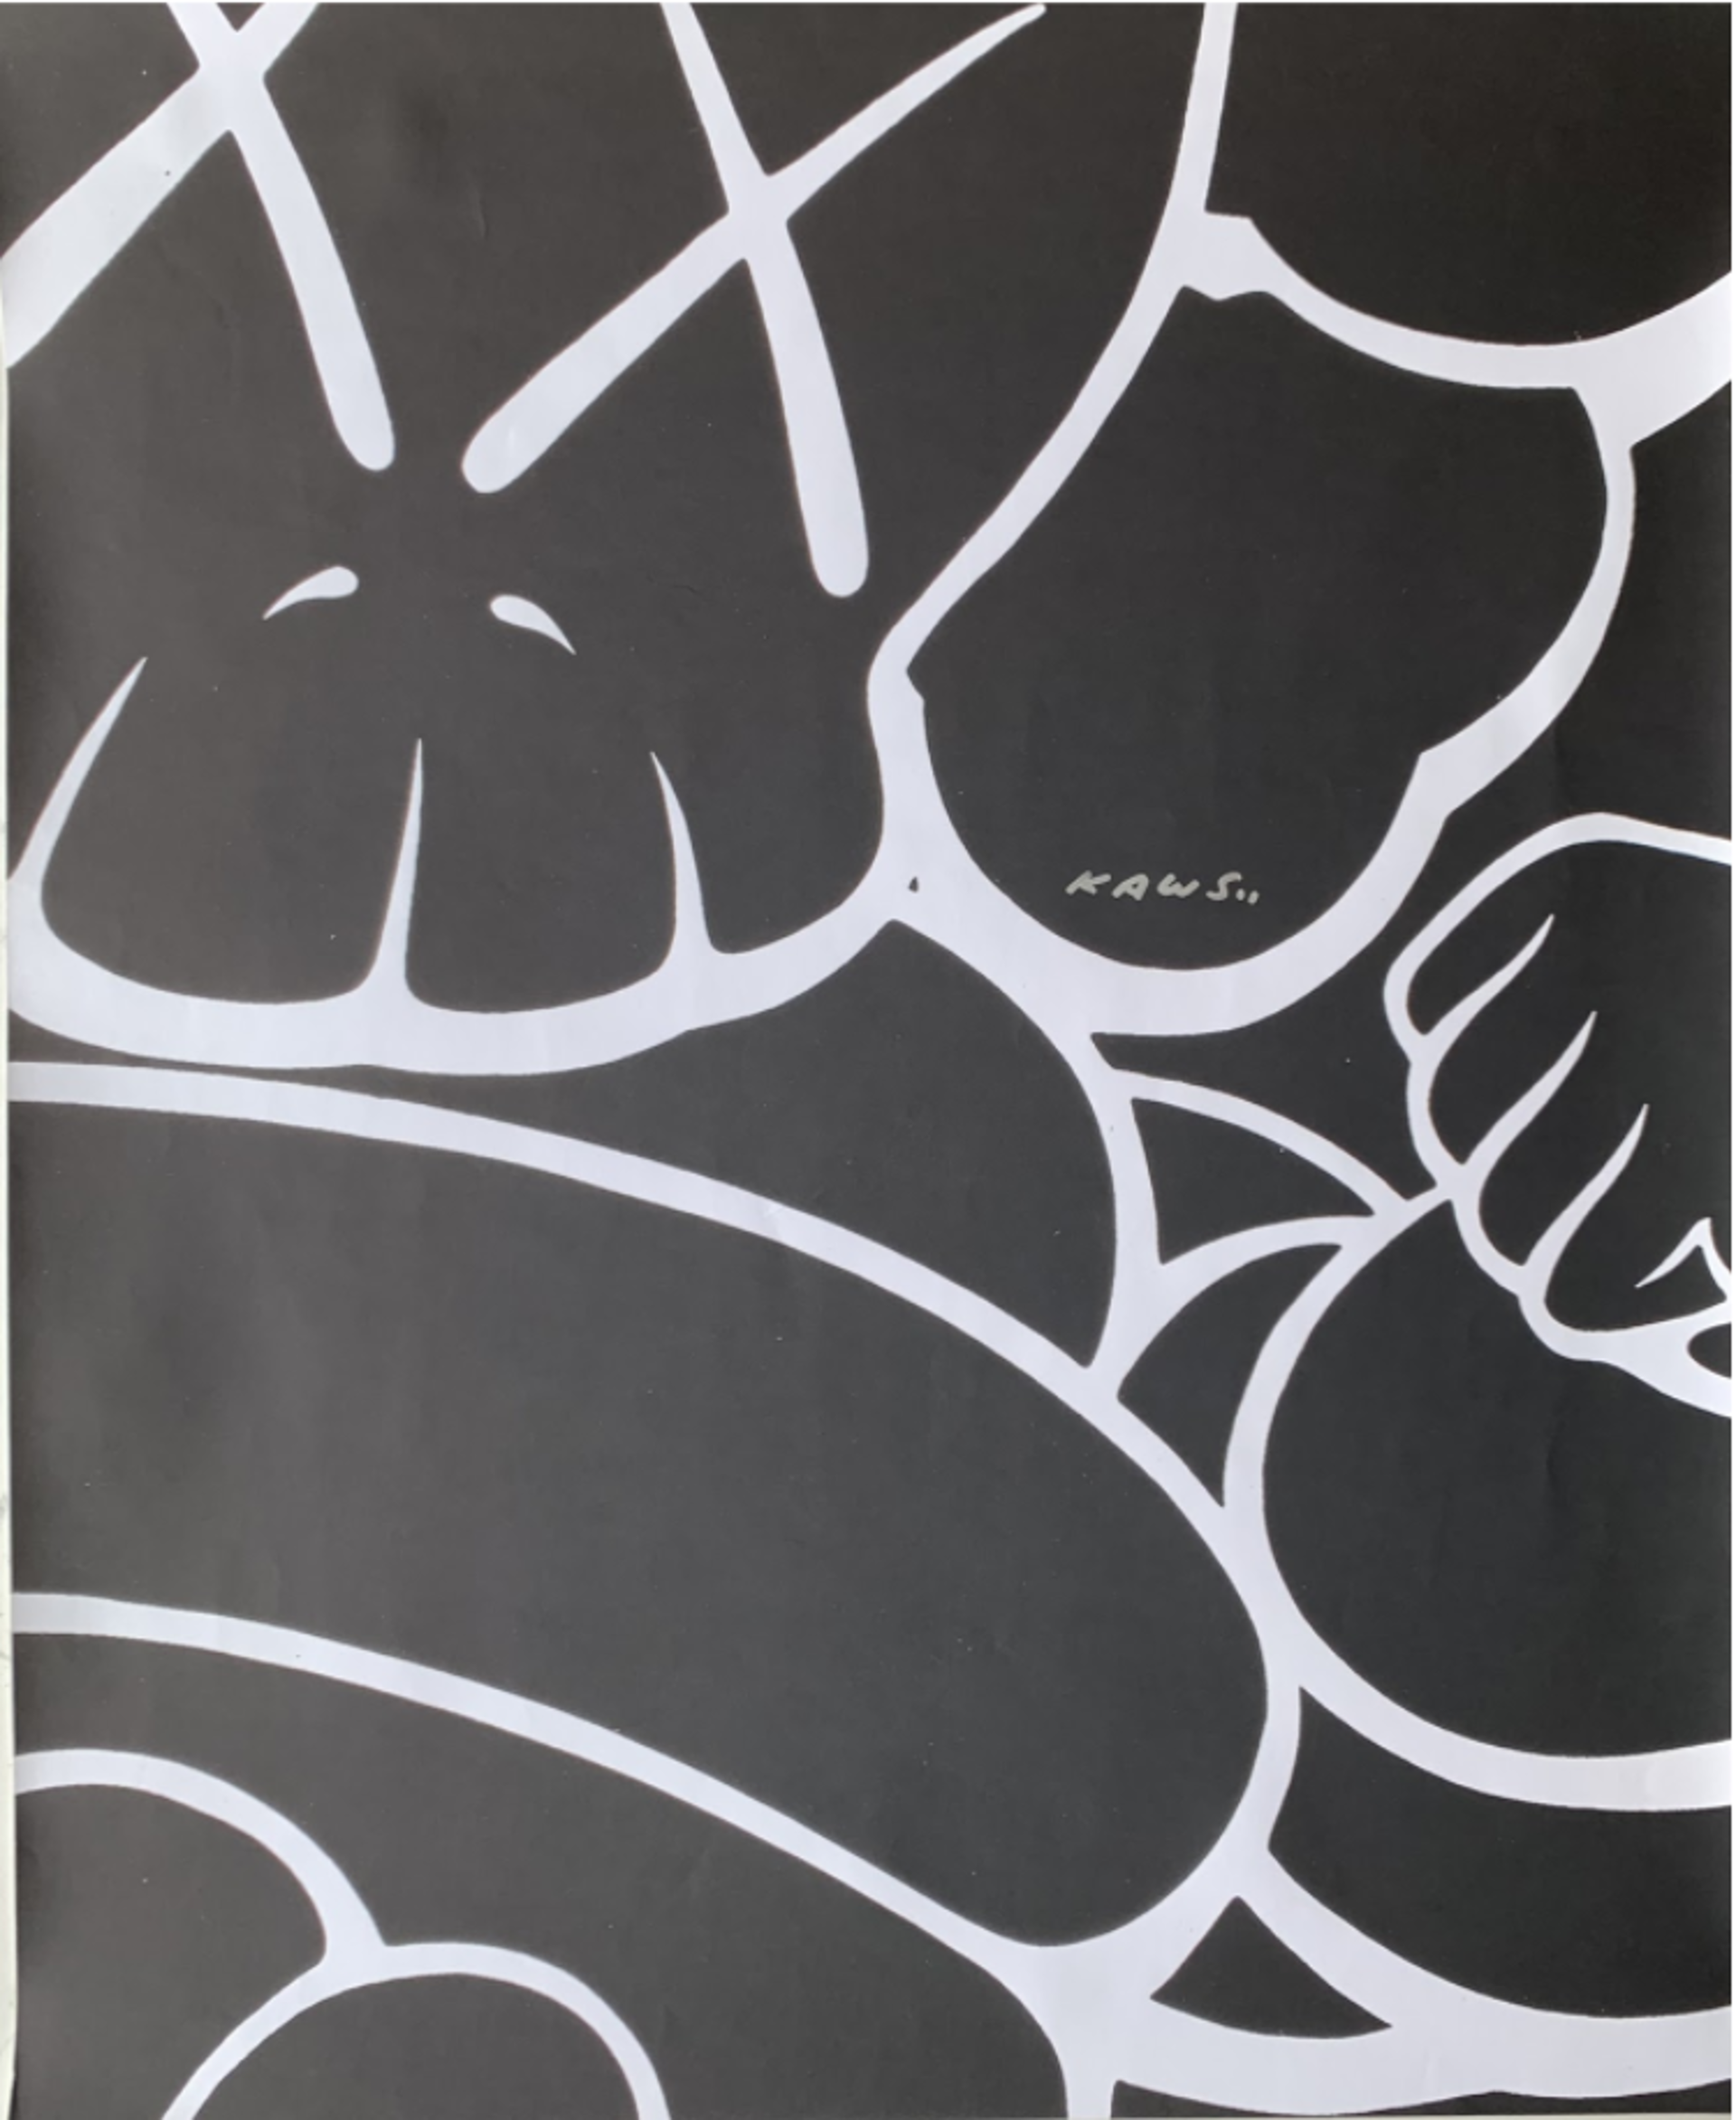 Signed Chum Poster by Kaws